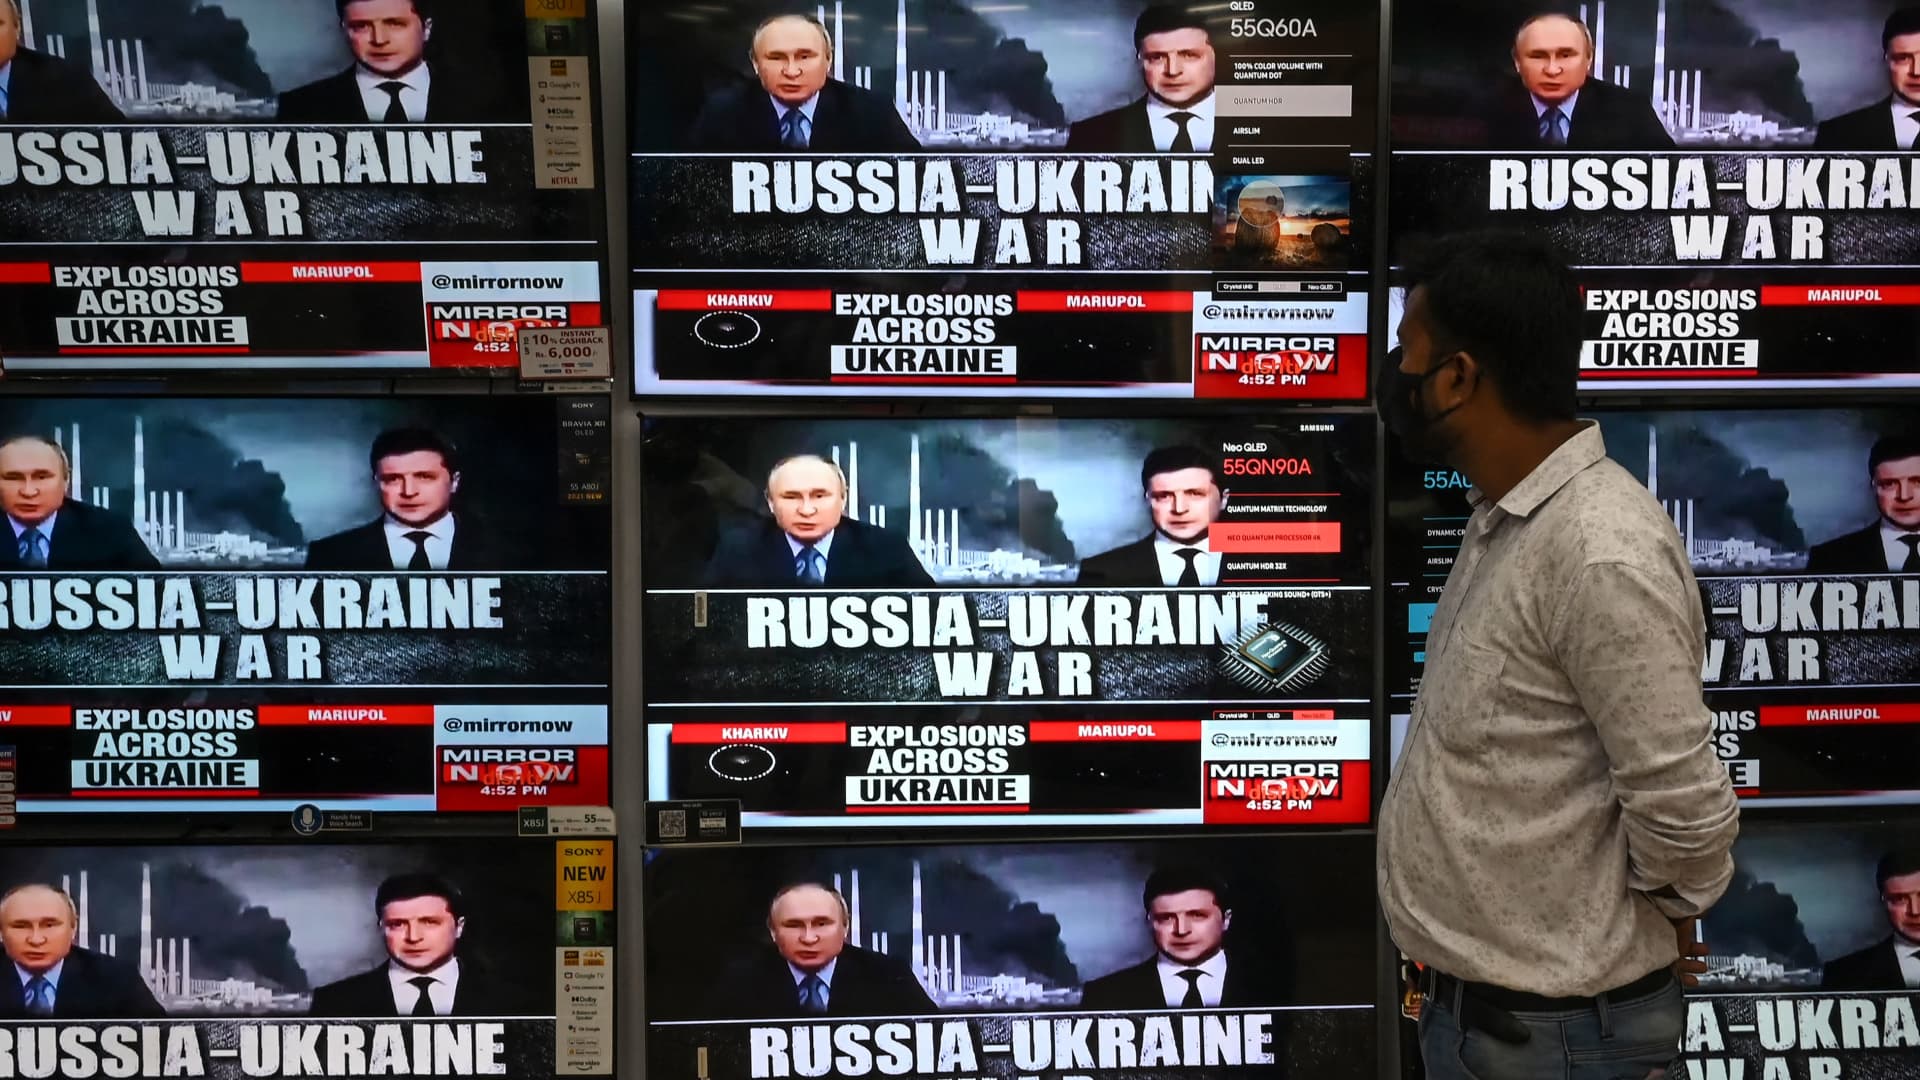 A man watches a coverage of the conflict between Russia and Ukraine displayed on televisions in Kolkata on February 24, 2022.